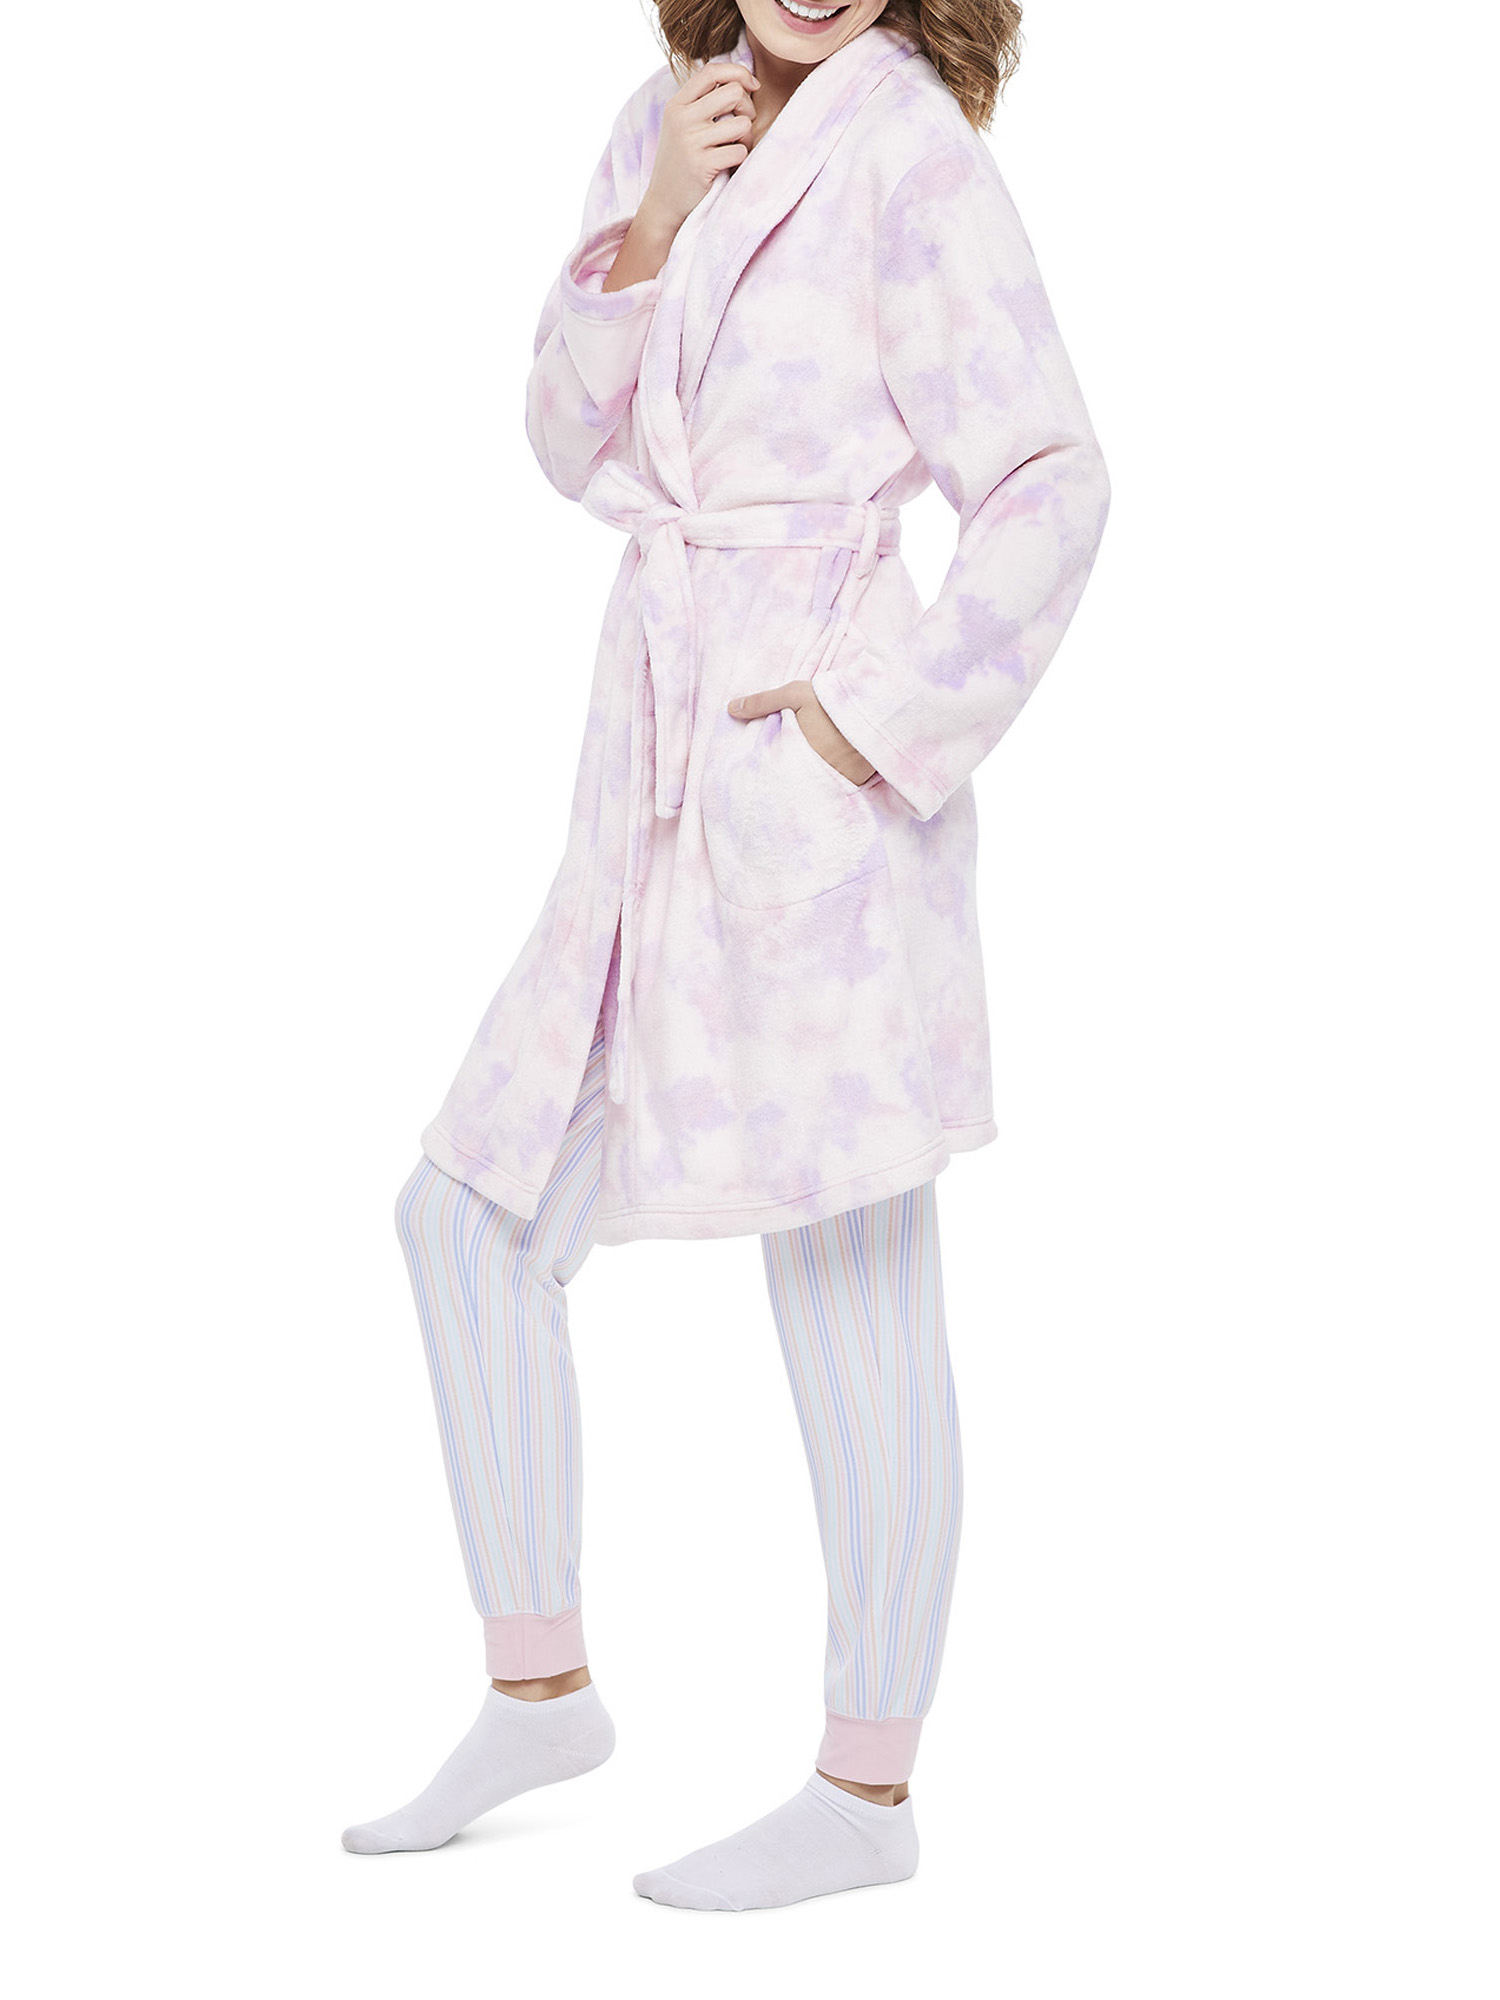 GEORGE Tie Dye Afternoon Polyester Robe (Women's or Women's Plus) 1 Pack - image 3 of 7